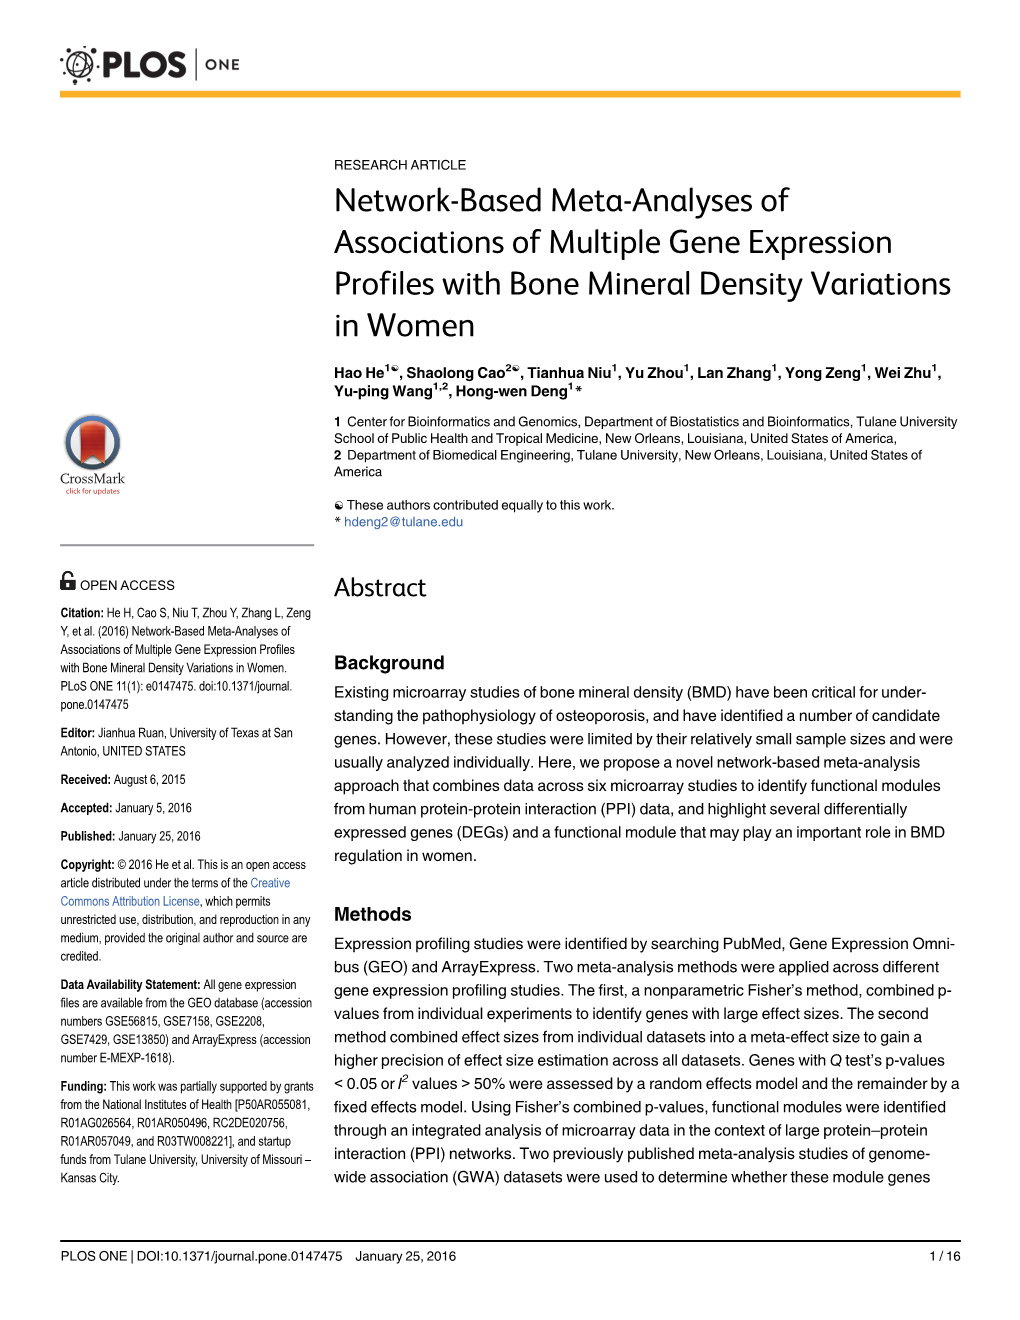 Network-Based Meta-Analyses of Associations of Multiple Gene Expression Profiles with Bone Mineral Density Variations in Women